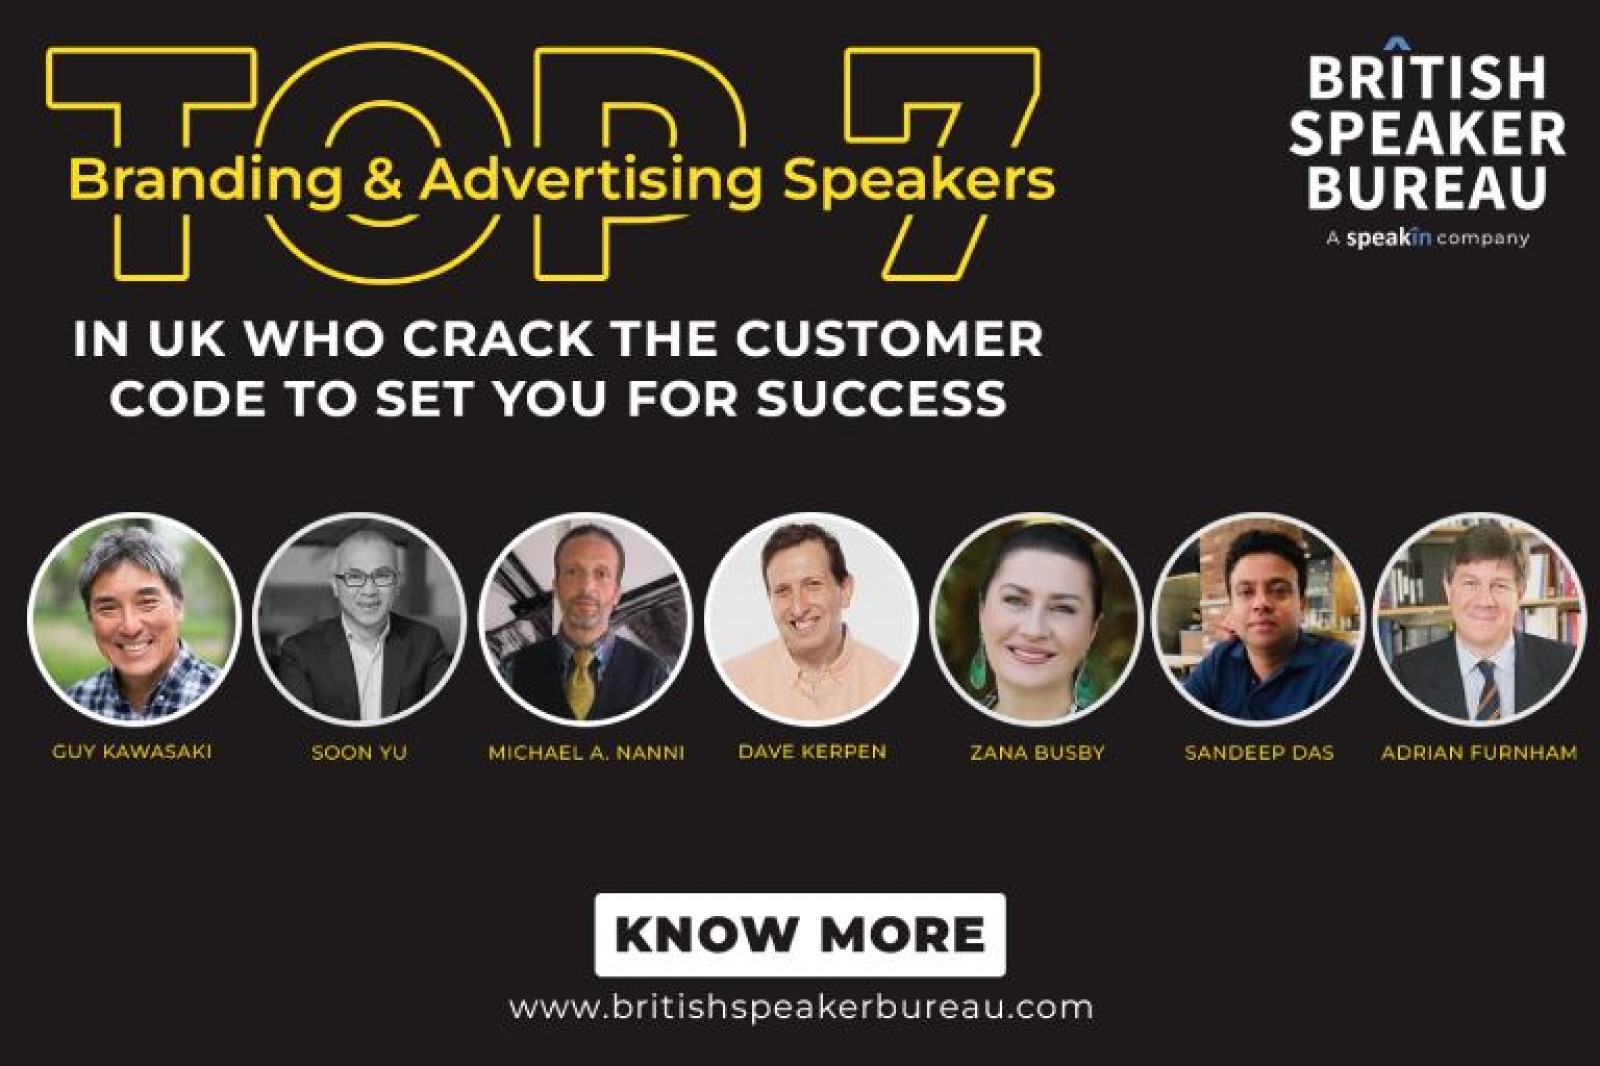 Top 7 Branding & Advertising Speakers in UK Who Crack the Customer Code to Set You for Success